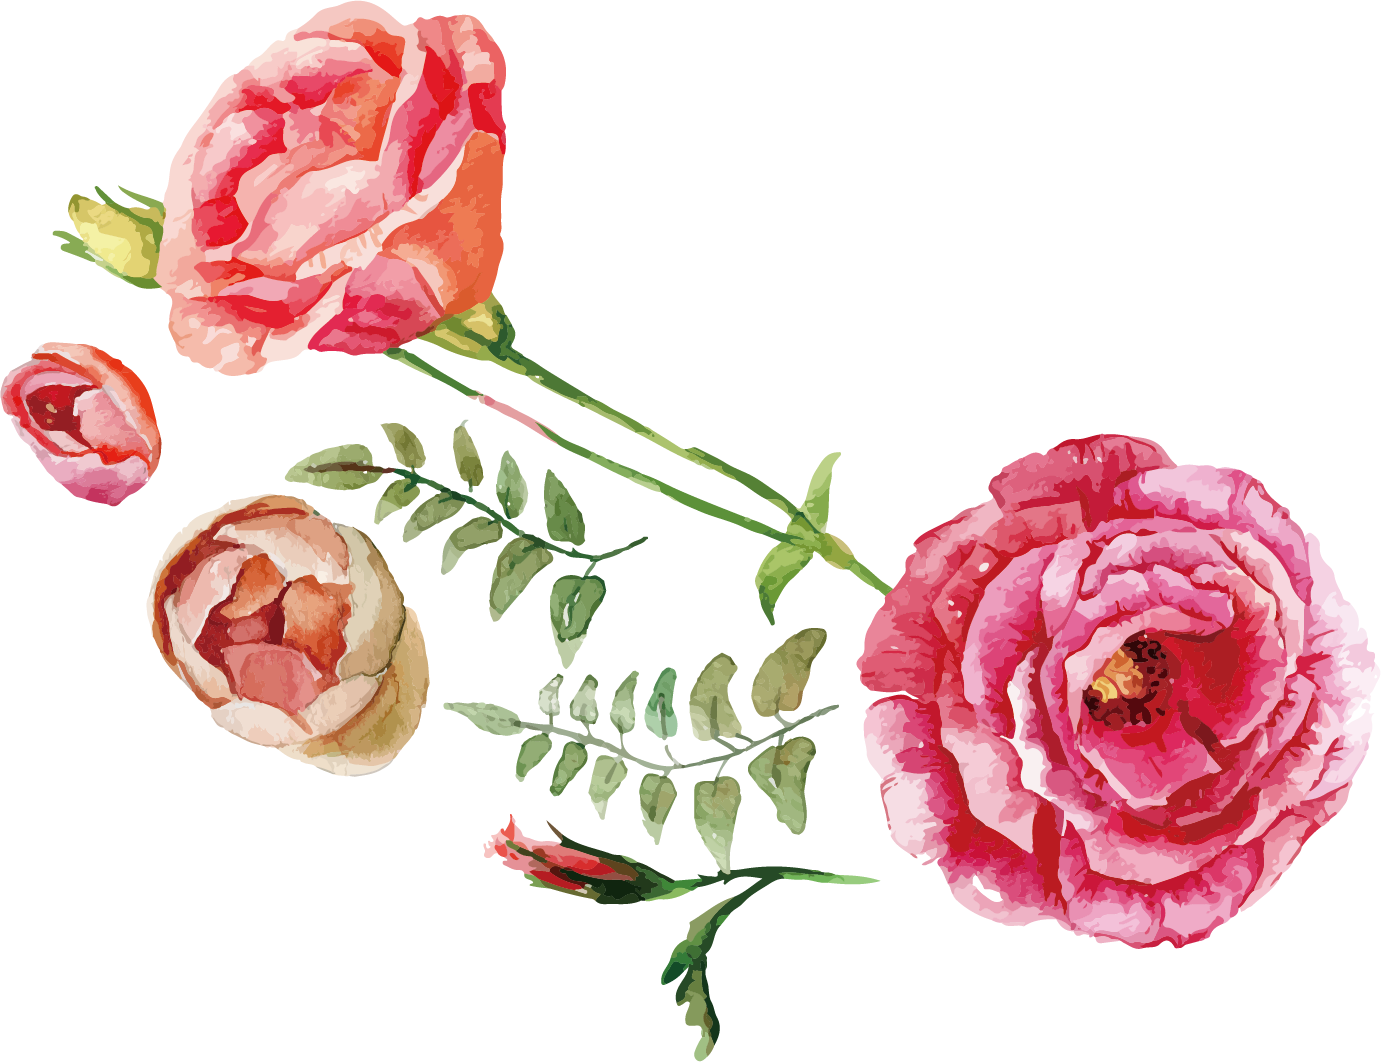 Rose Flower Bouquet Illustration - Watercolor Flowers Vector Free Download (1381x1062)